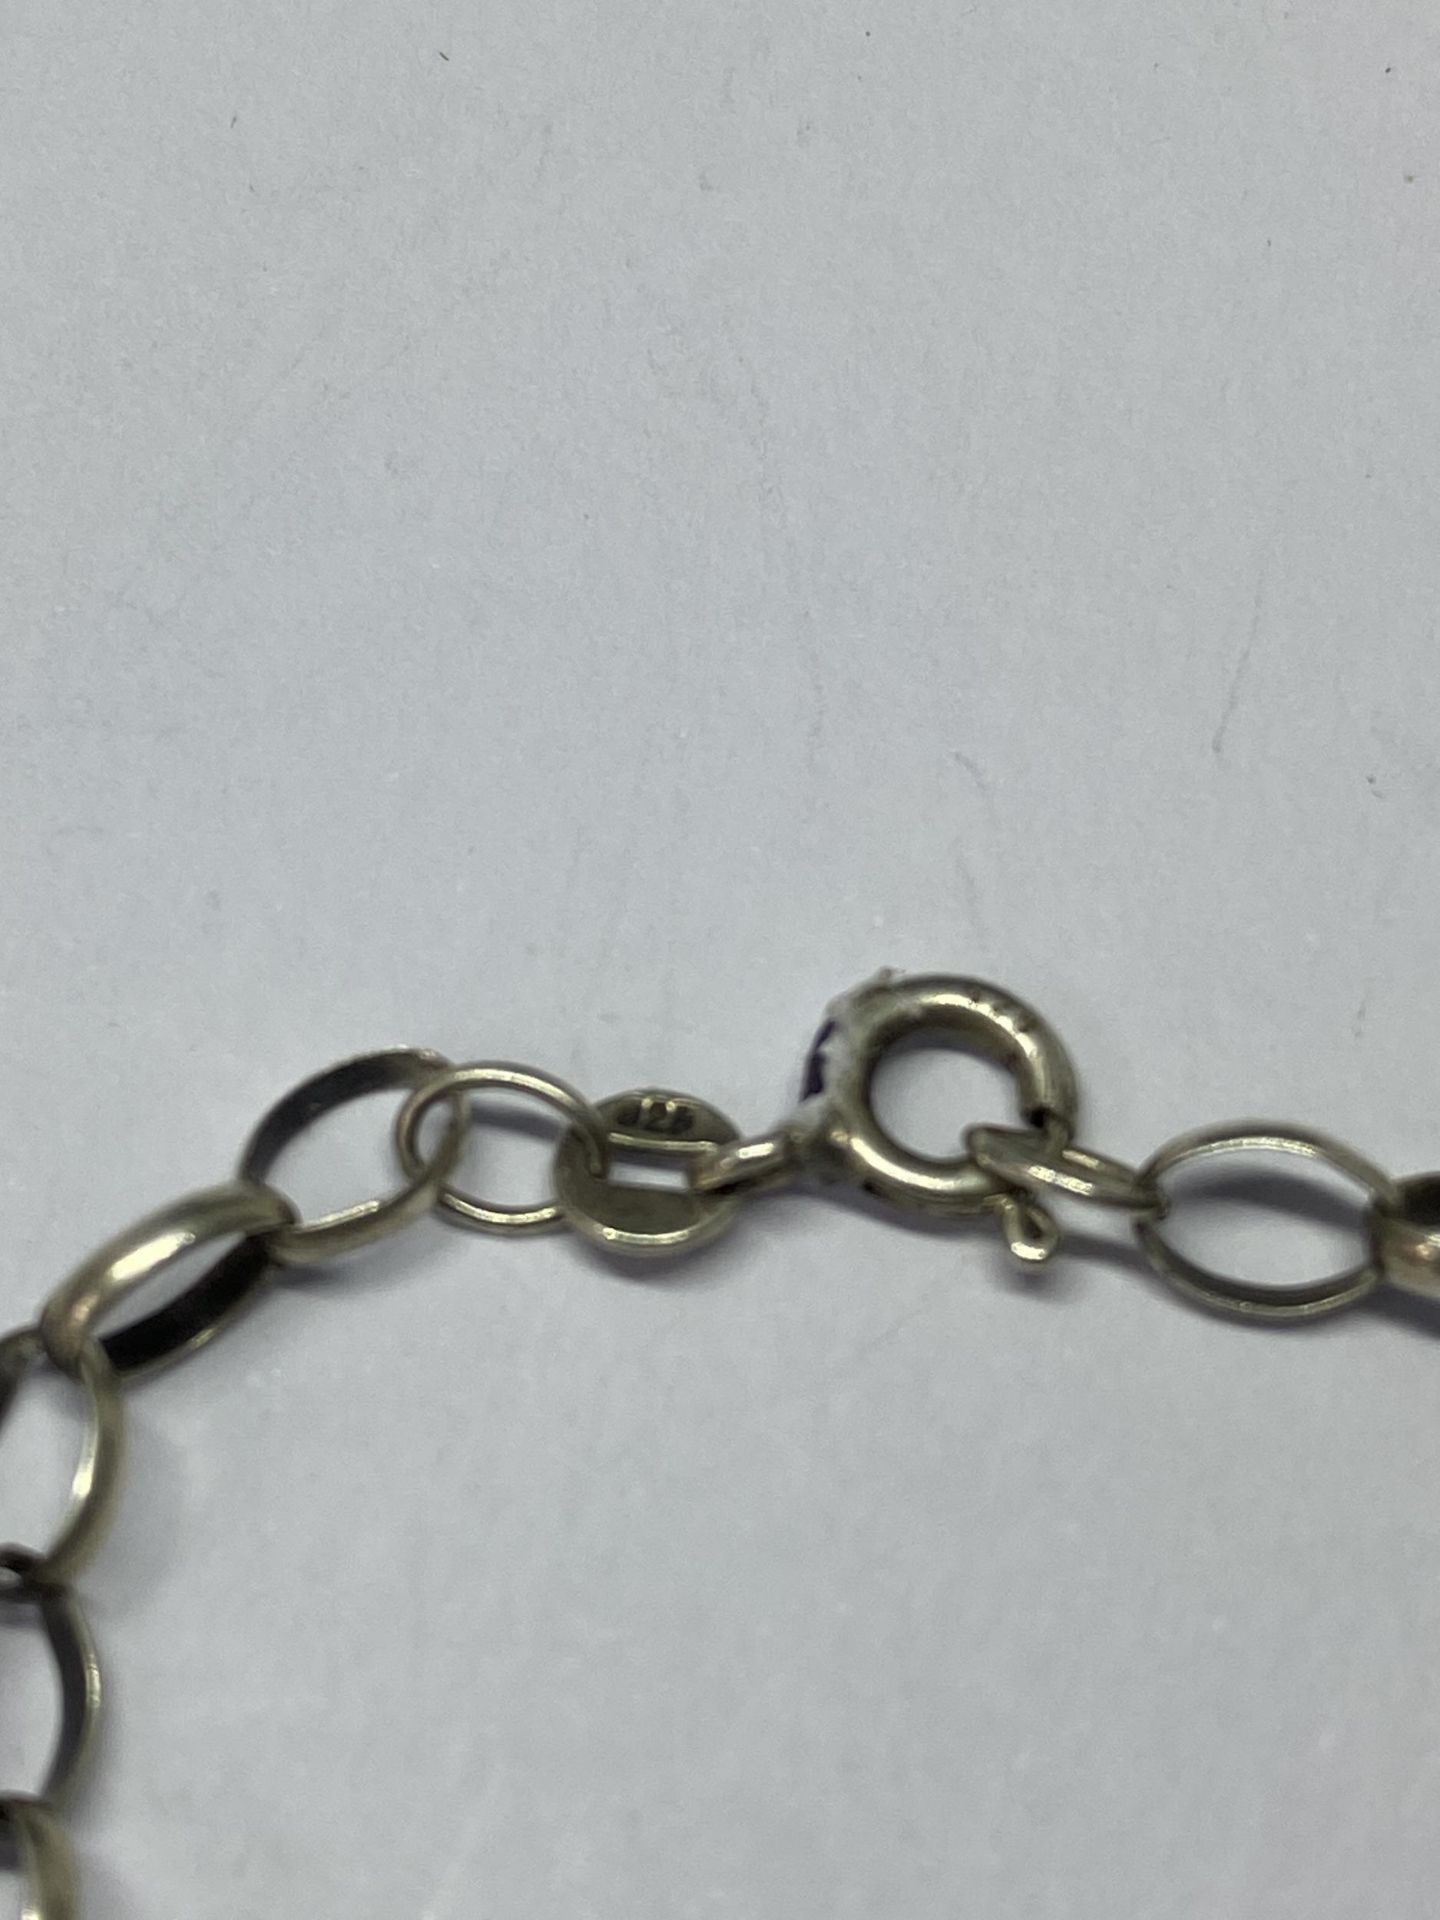 A SILVER BELCHER CHAIN - Image 3 of 3